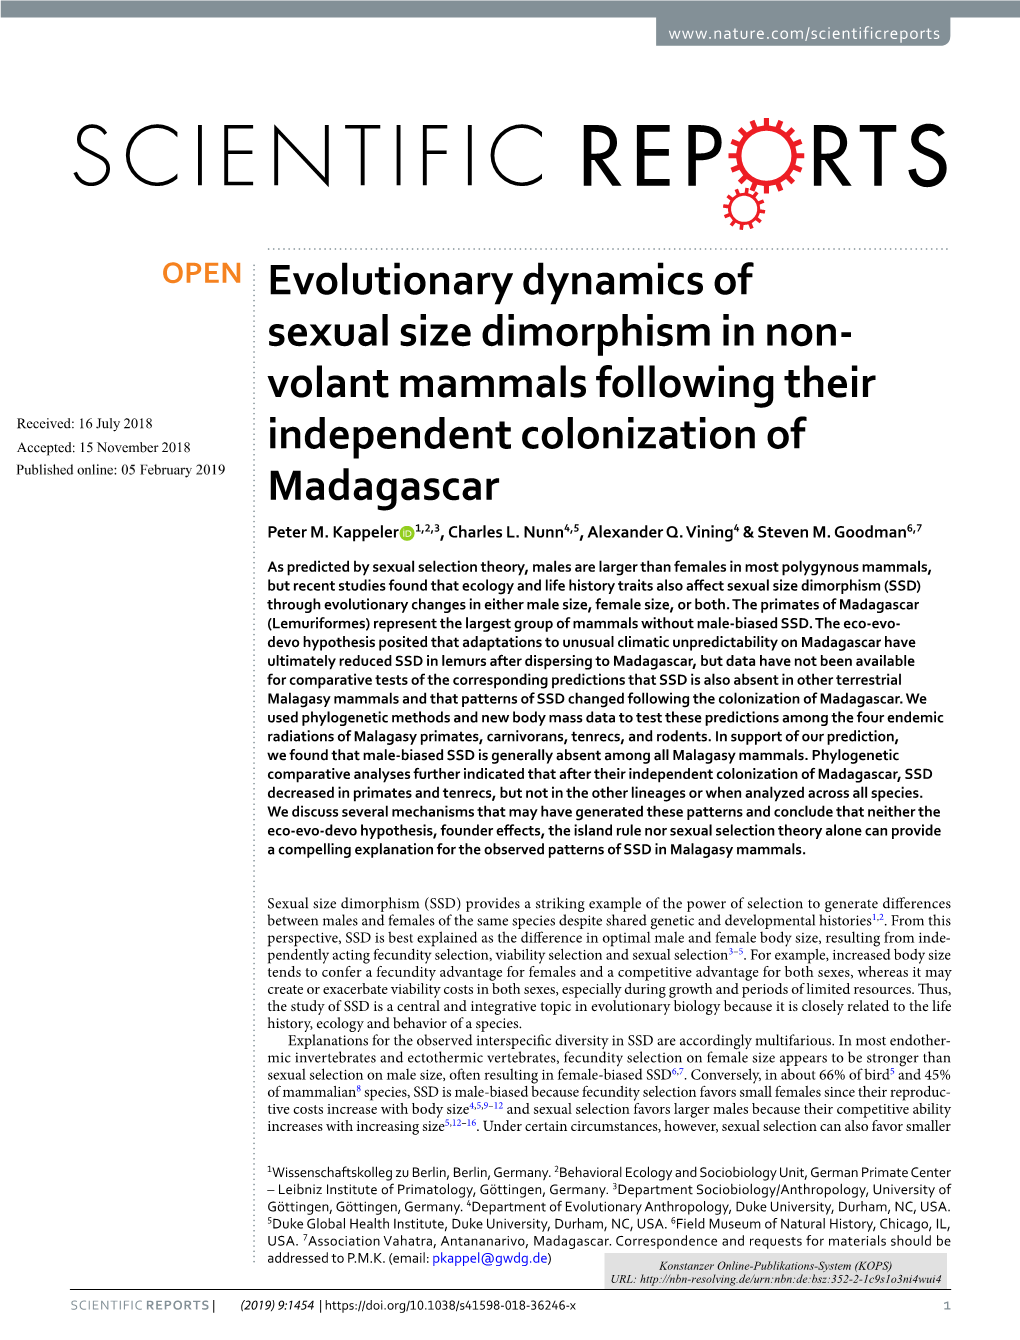 Evolutionary Dynamics of Sexual Size Dimorphism in Non-Volant Mammals Following Their Independent Colonization of Madagascar